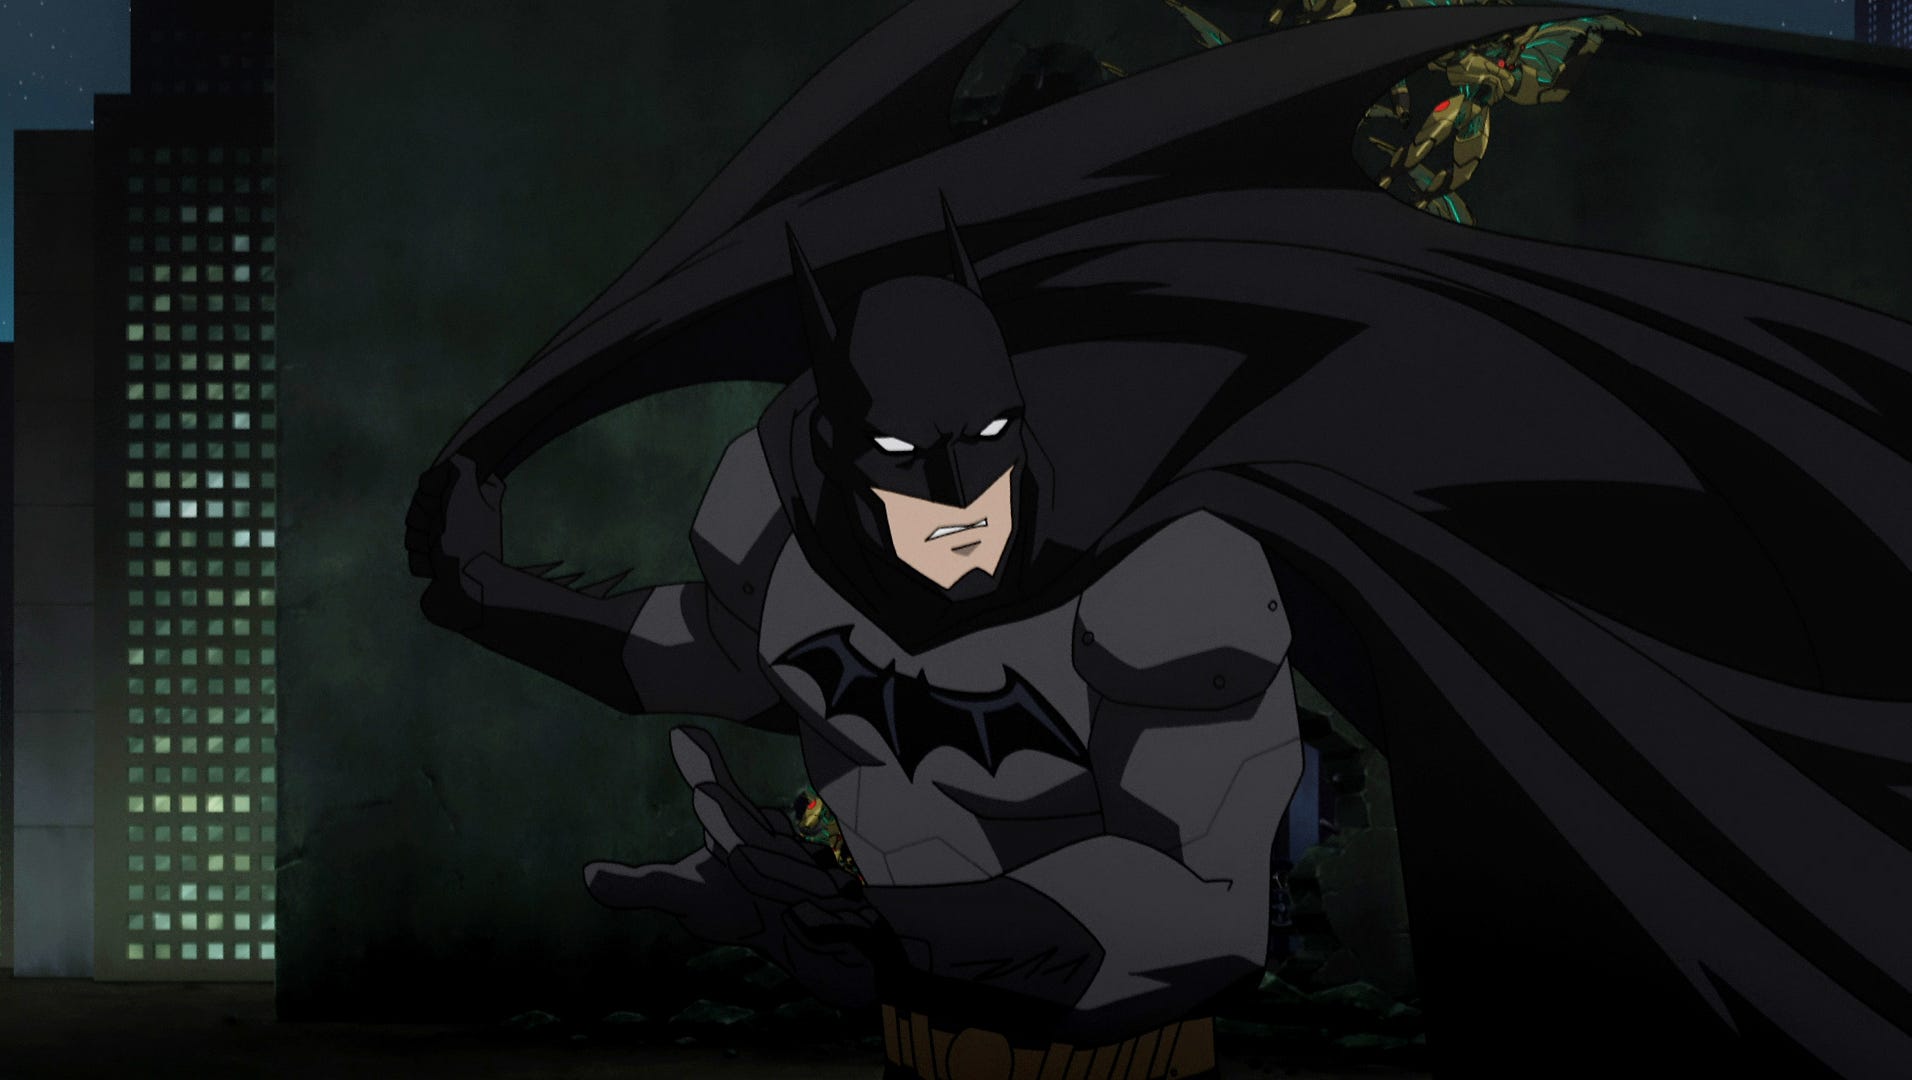 What you need to know about the 'Batman: The Killing Joke' trailer